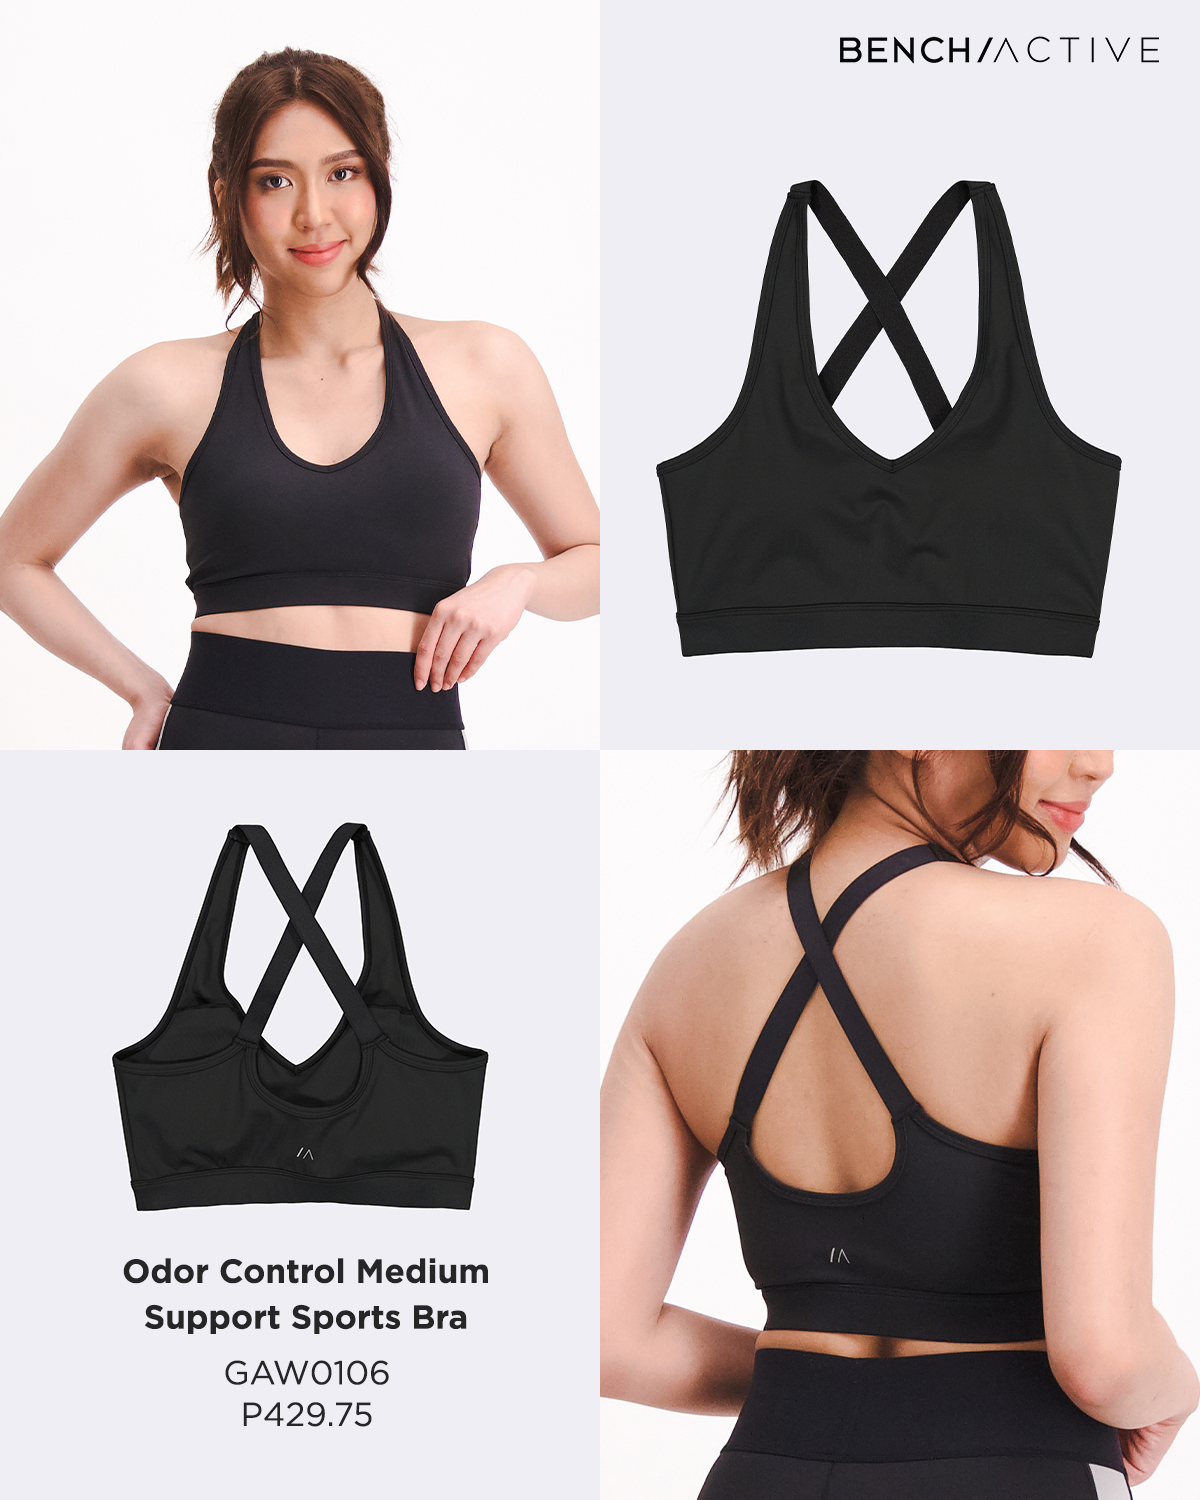 BENCH/ on X: Sleek, versatile, and timeless! Let #BENCHActive deliver  carefree confidence when you hit the gym 💪🏻 🤸🏻‍♀️ Odor Control Medium  Support Sports Bra - GAW0106 - P429.75 Buy Official, Buy